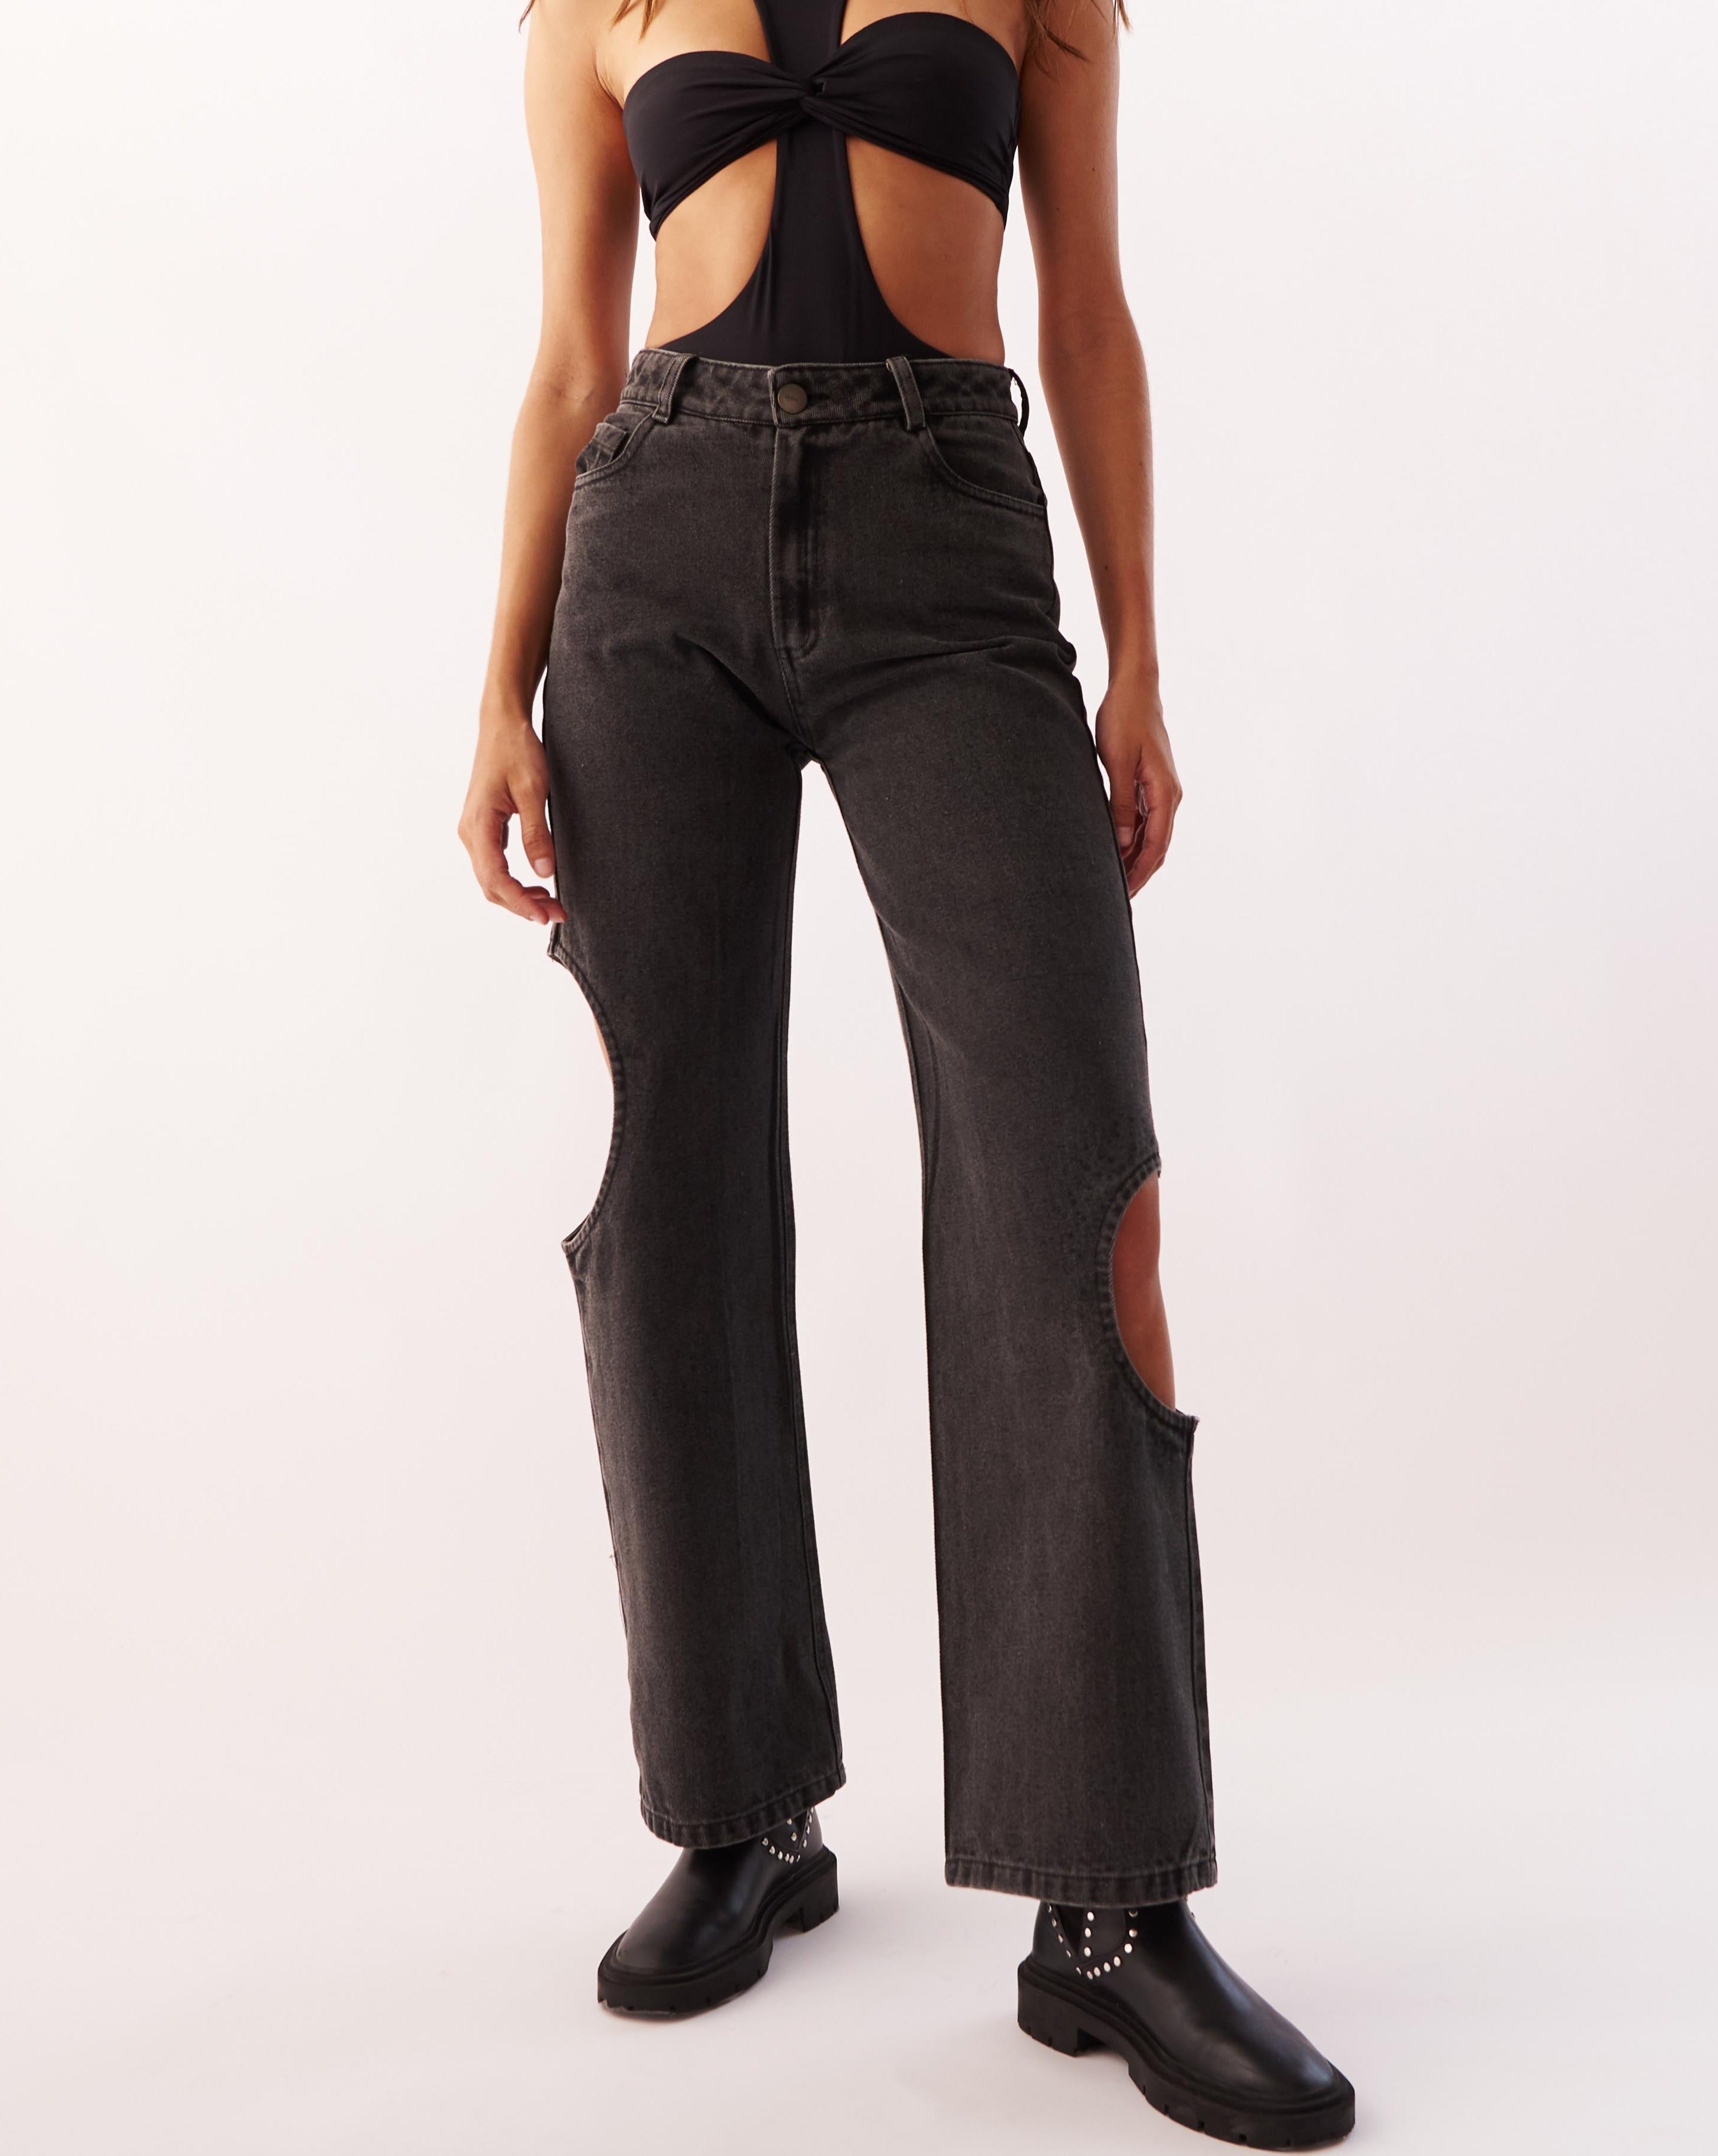 FORTUNE MID-RISE PANTS